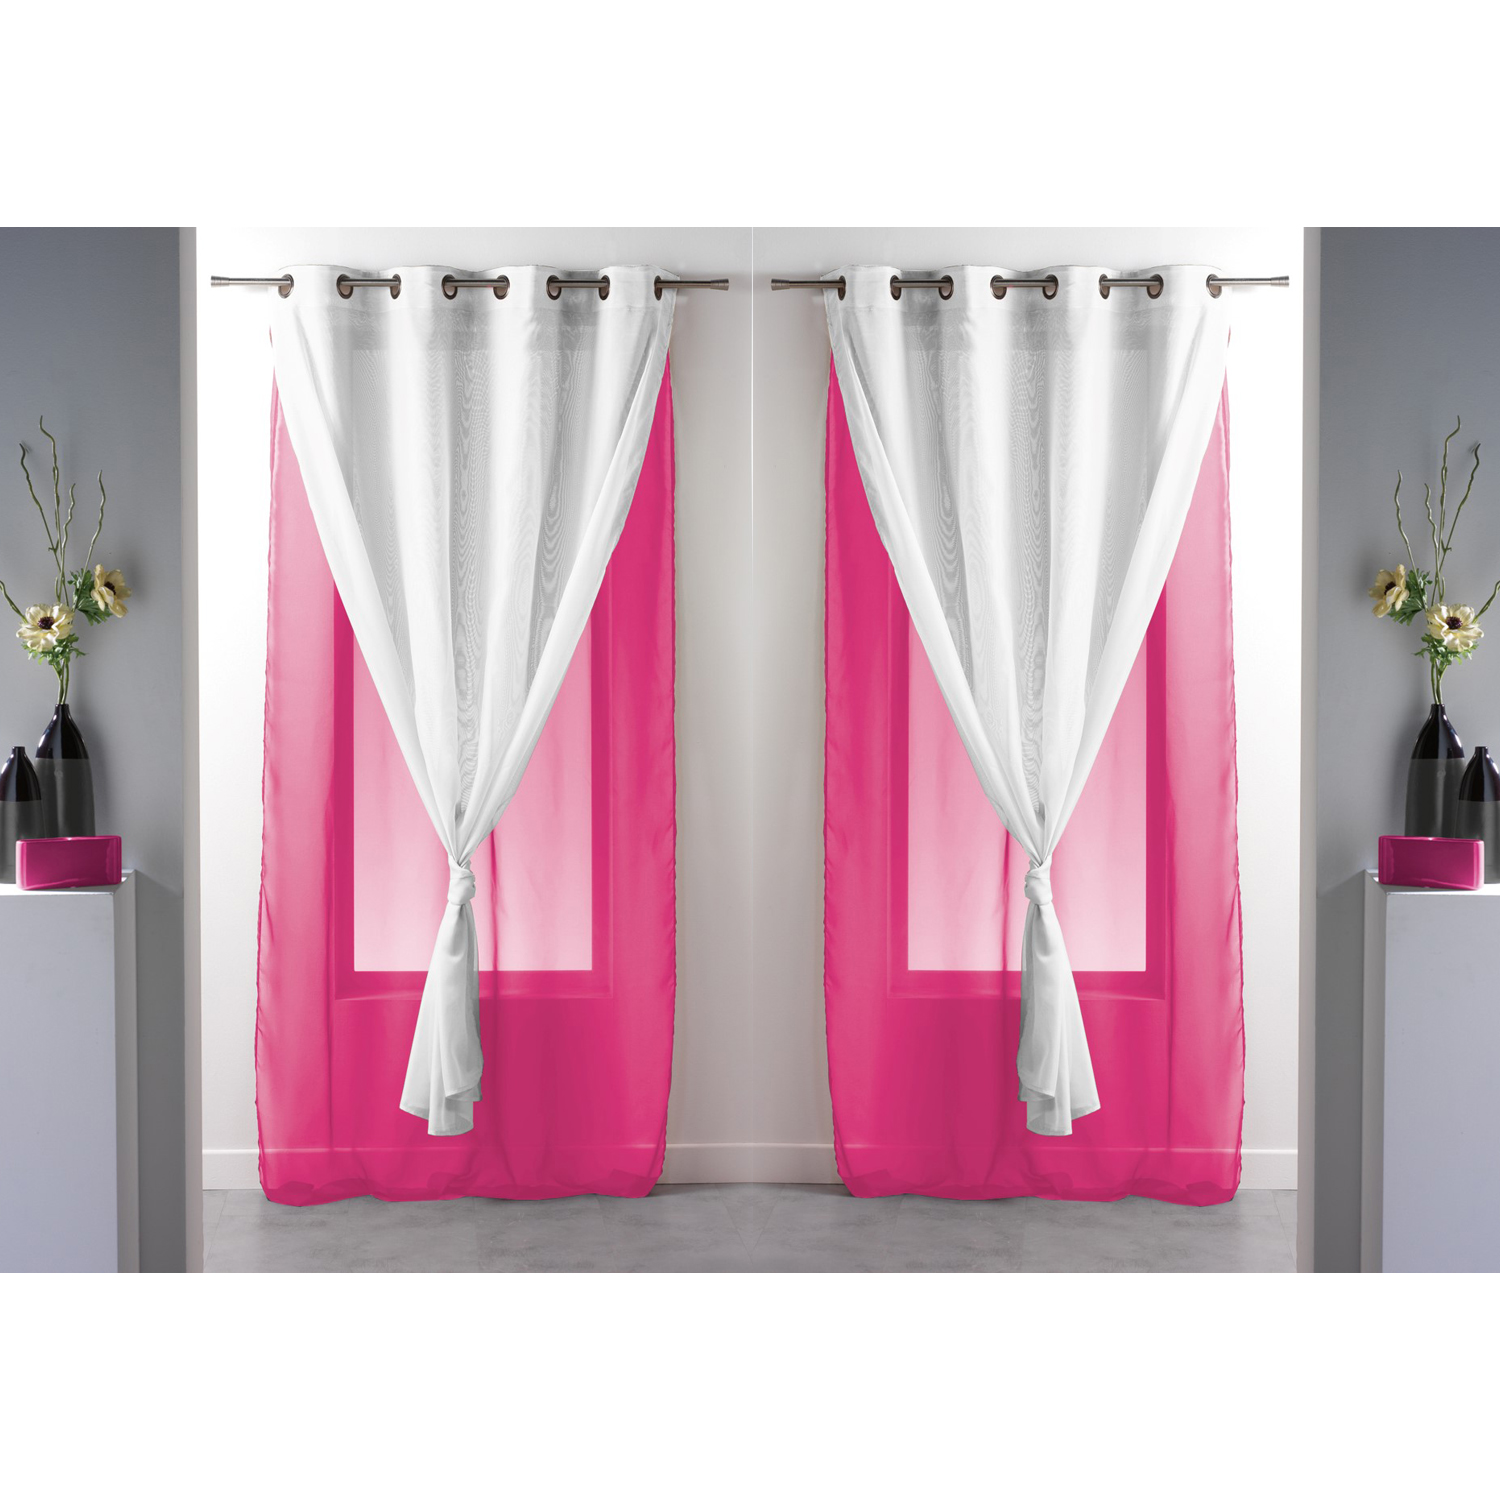 EVIDECO Set of 2 Double Layered Sheer Curtain Panel Grommet ROBIN